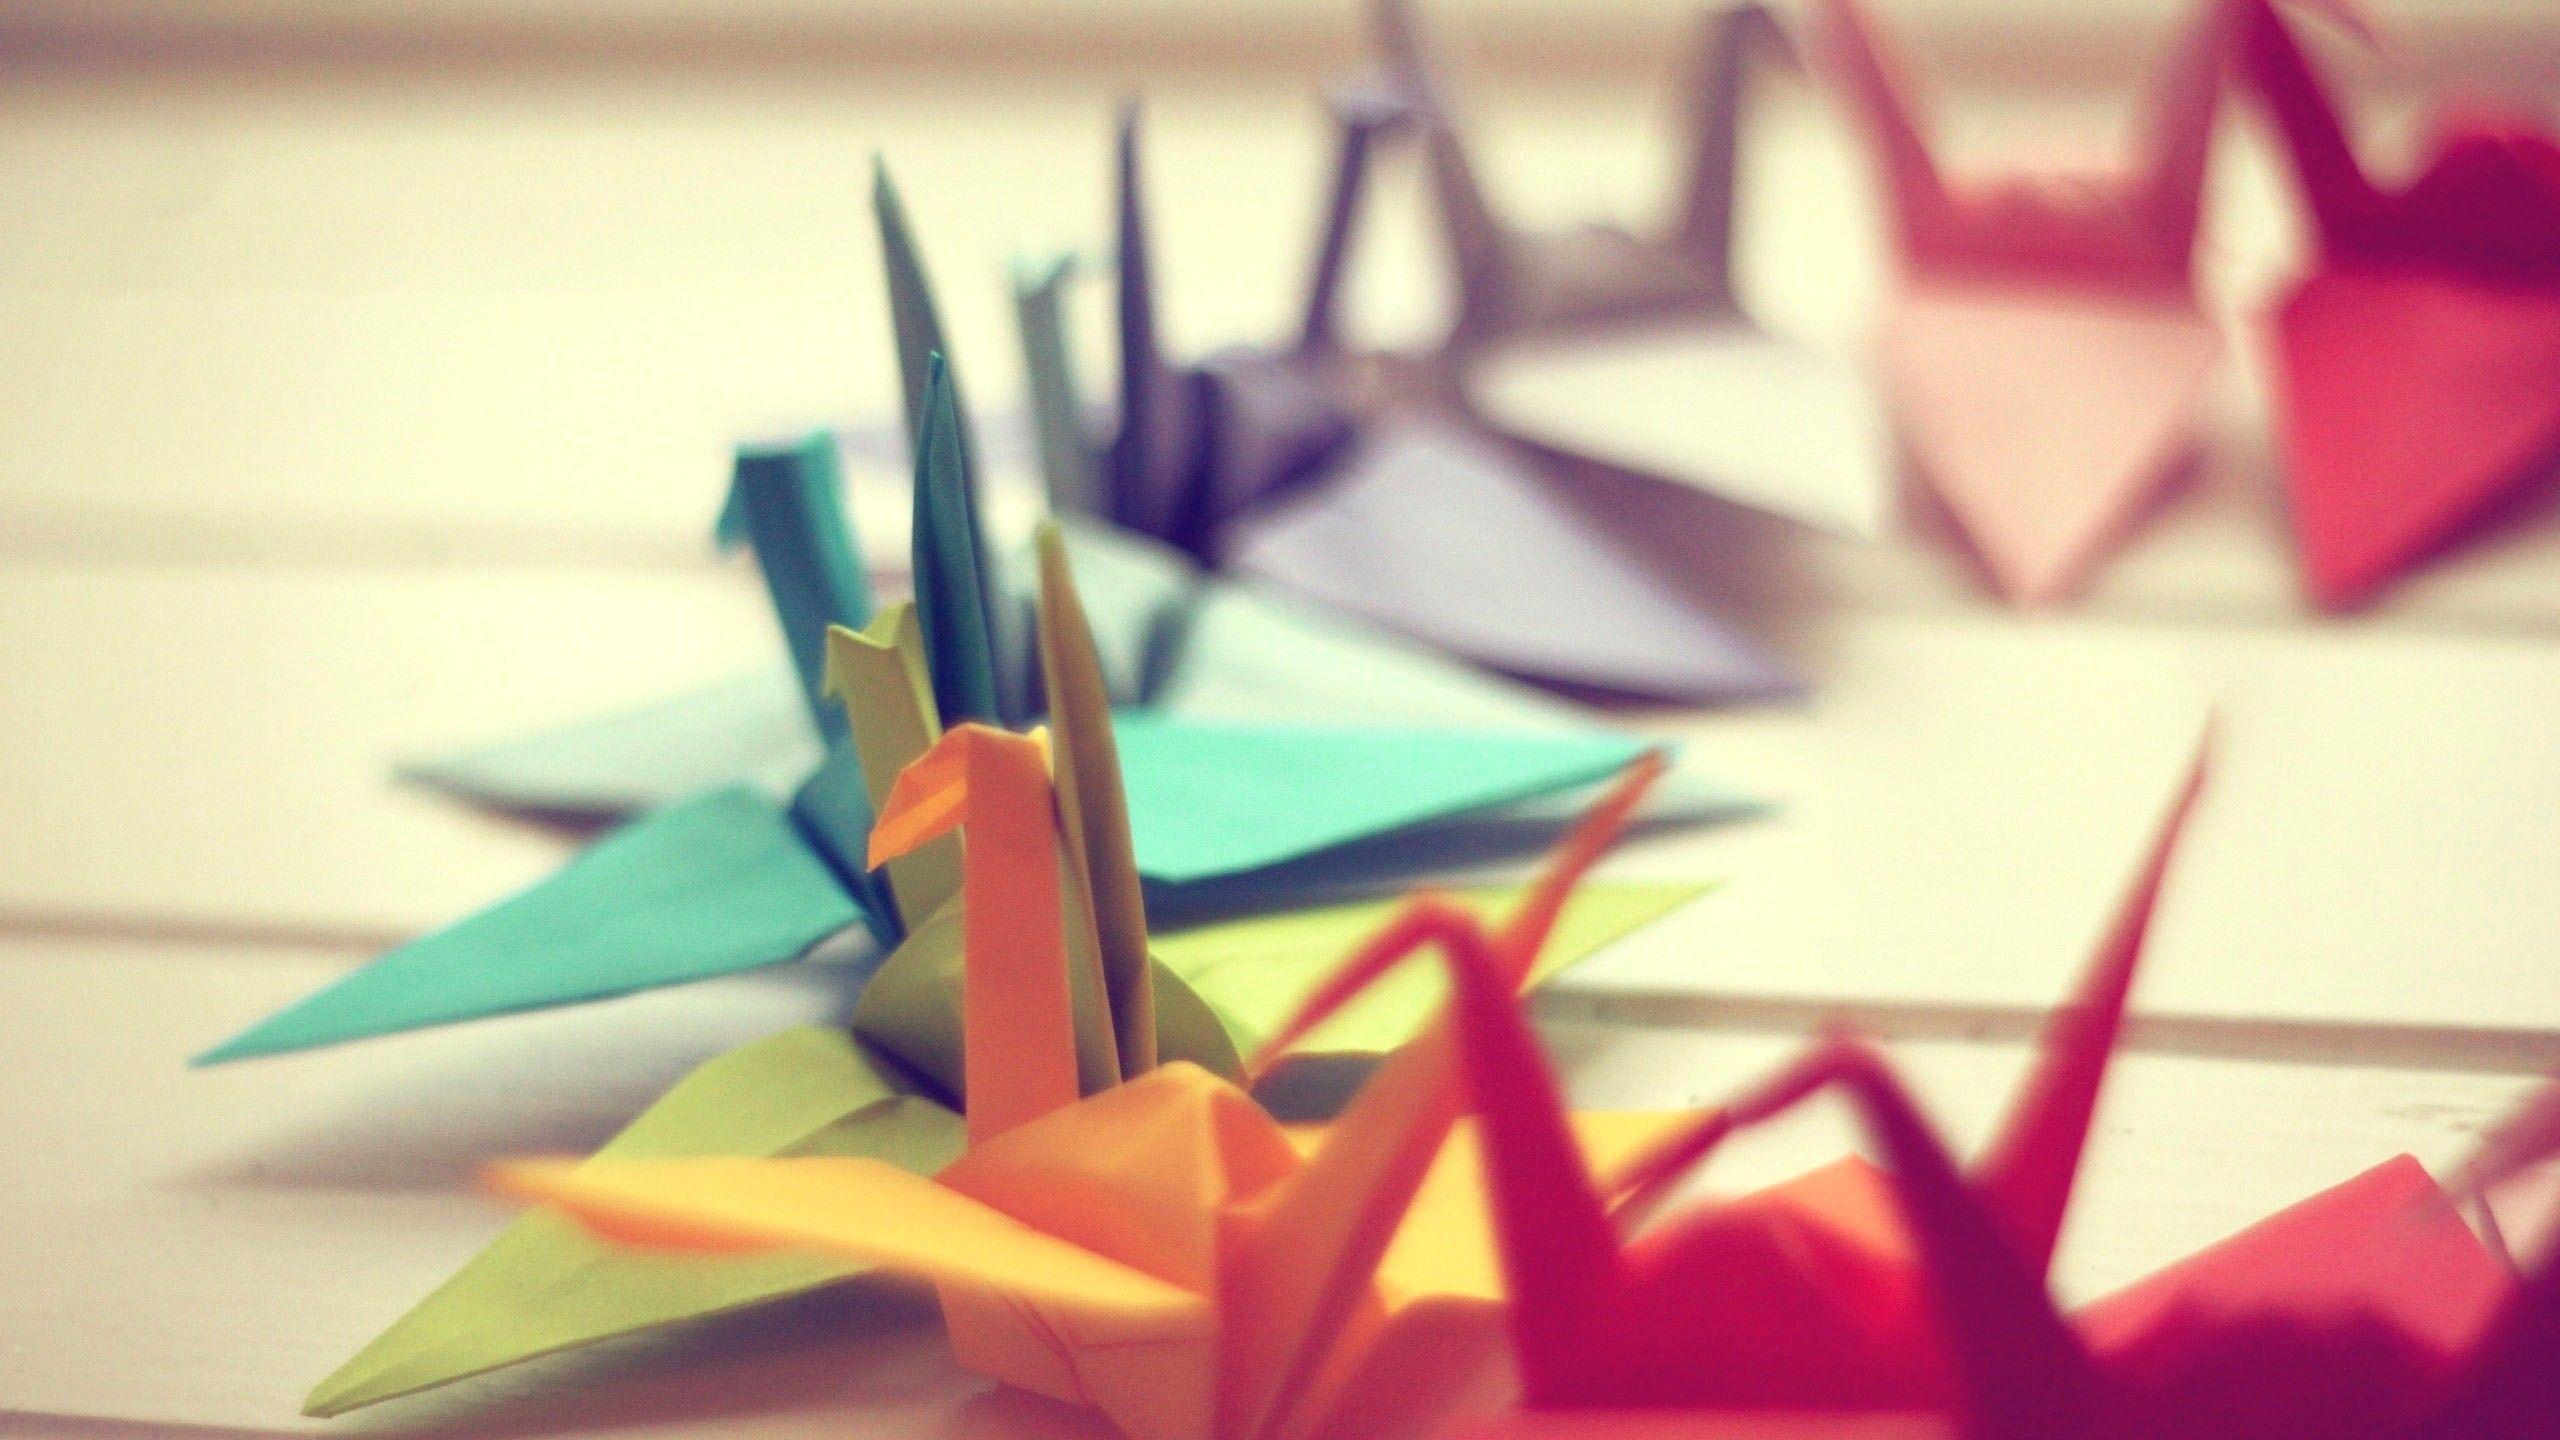 Japanese Origami Wallpapers - Top Free Japanese Origami Backgrounds